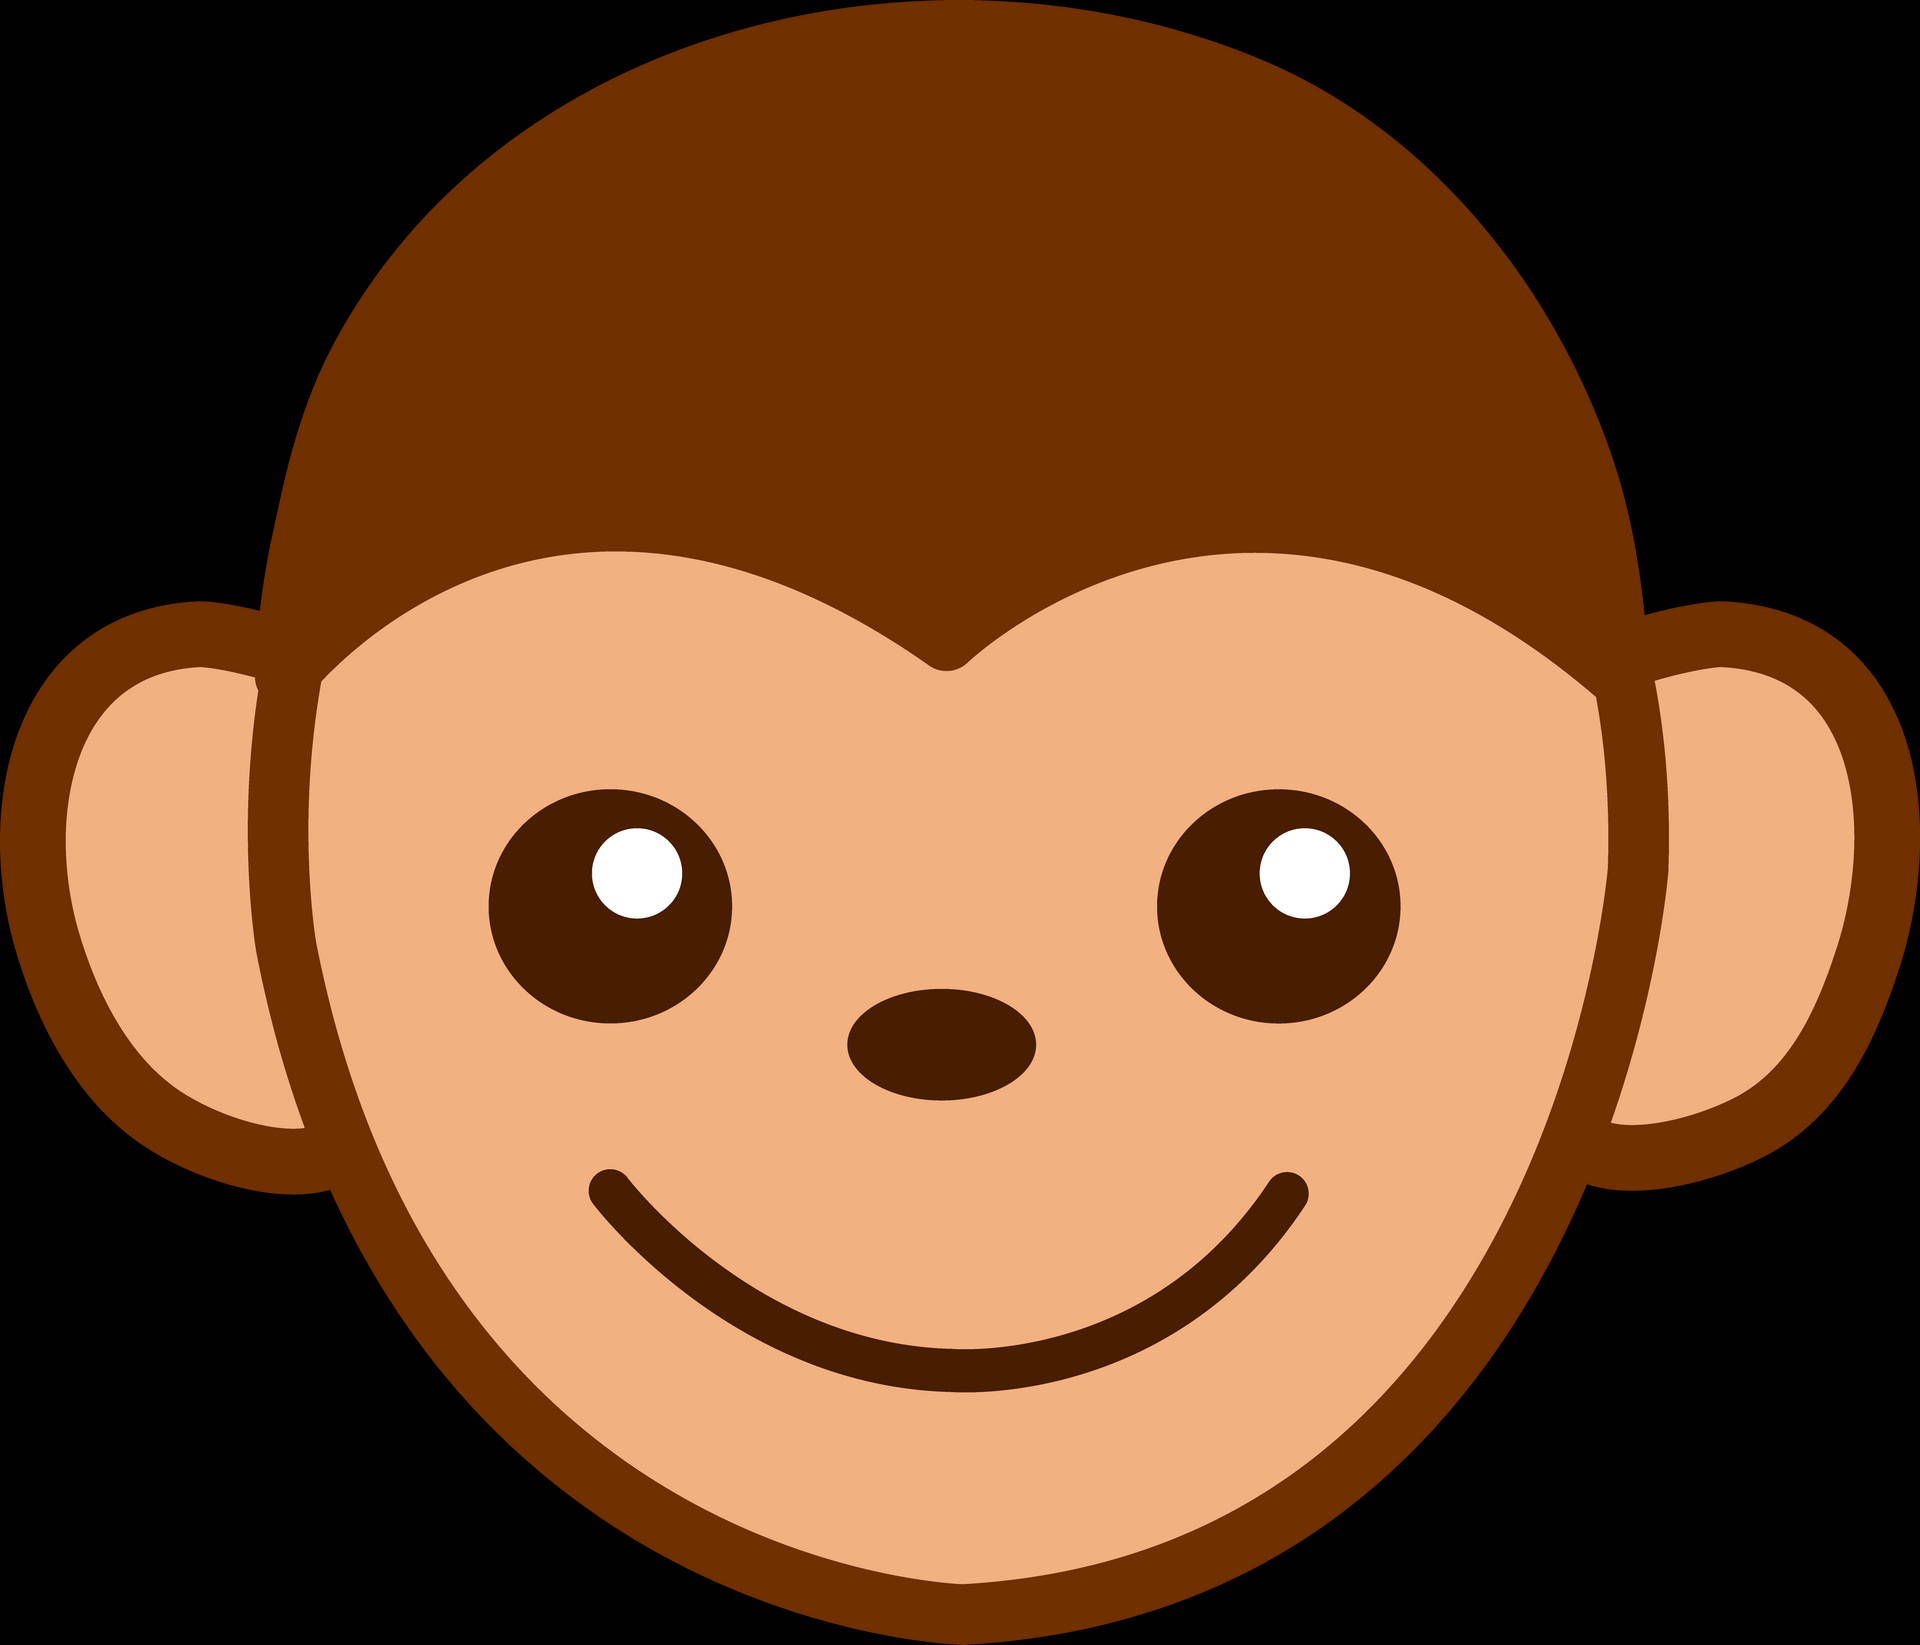 Cute Monkey Face Graphic